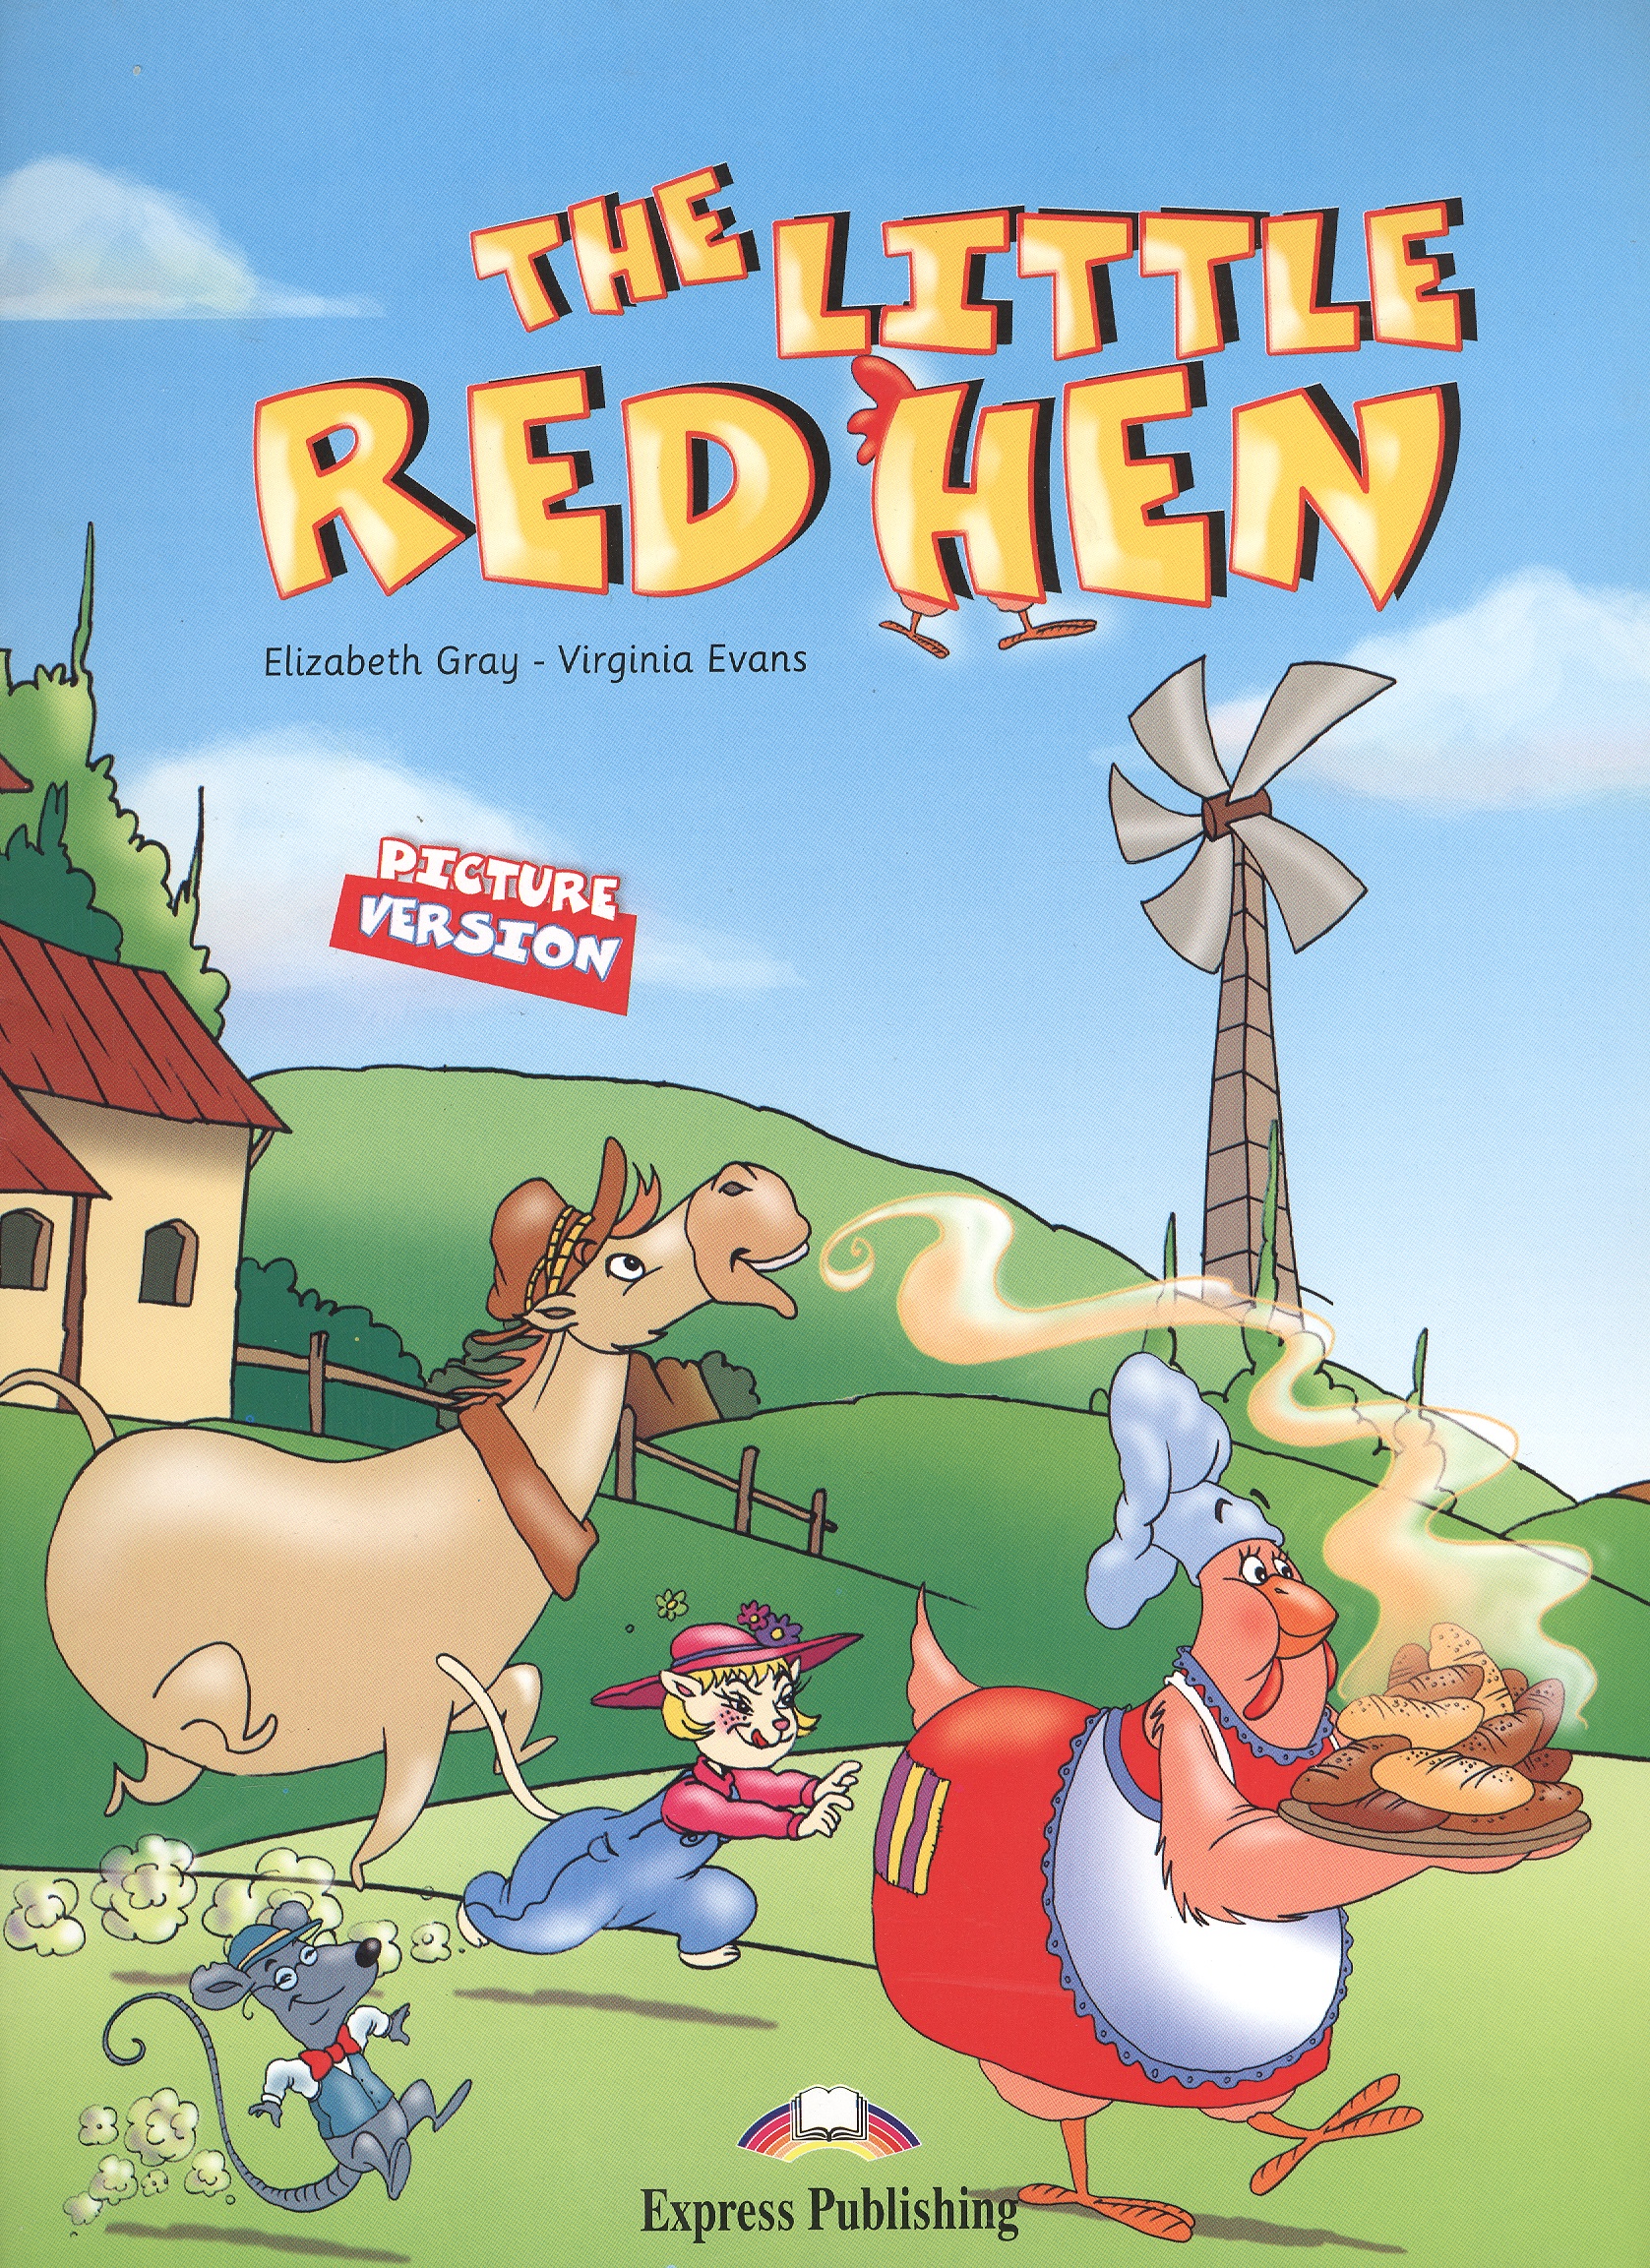 The Little Red Hen. Story Book. Сборник рассказов sly fox and red hen